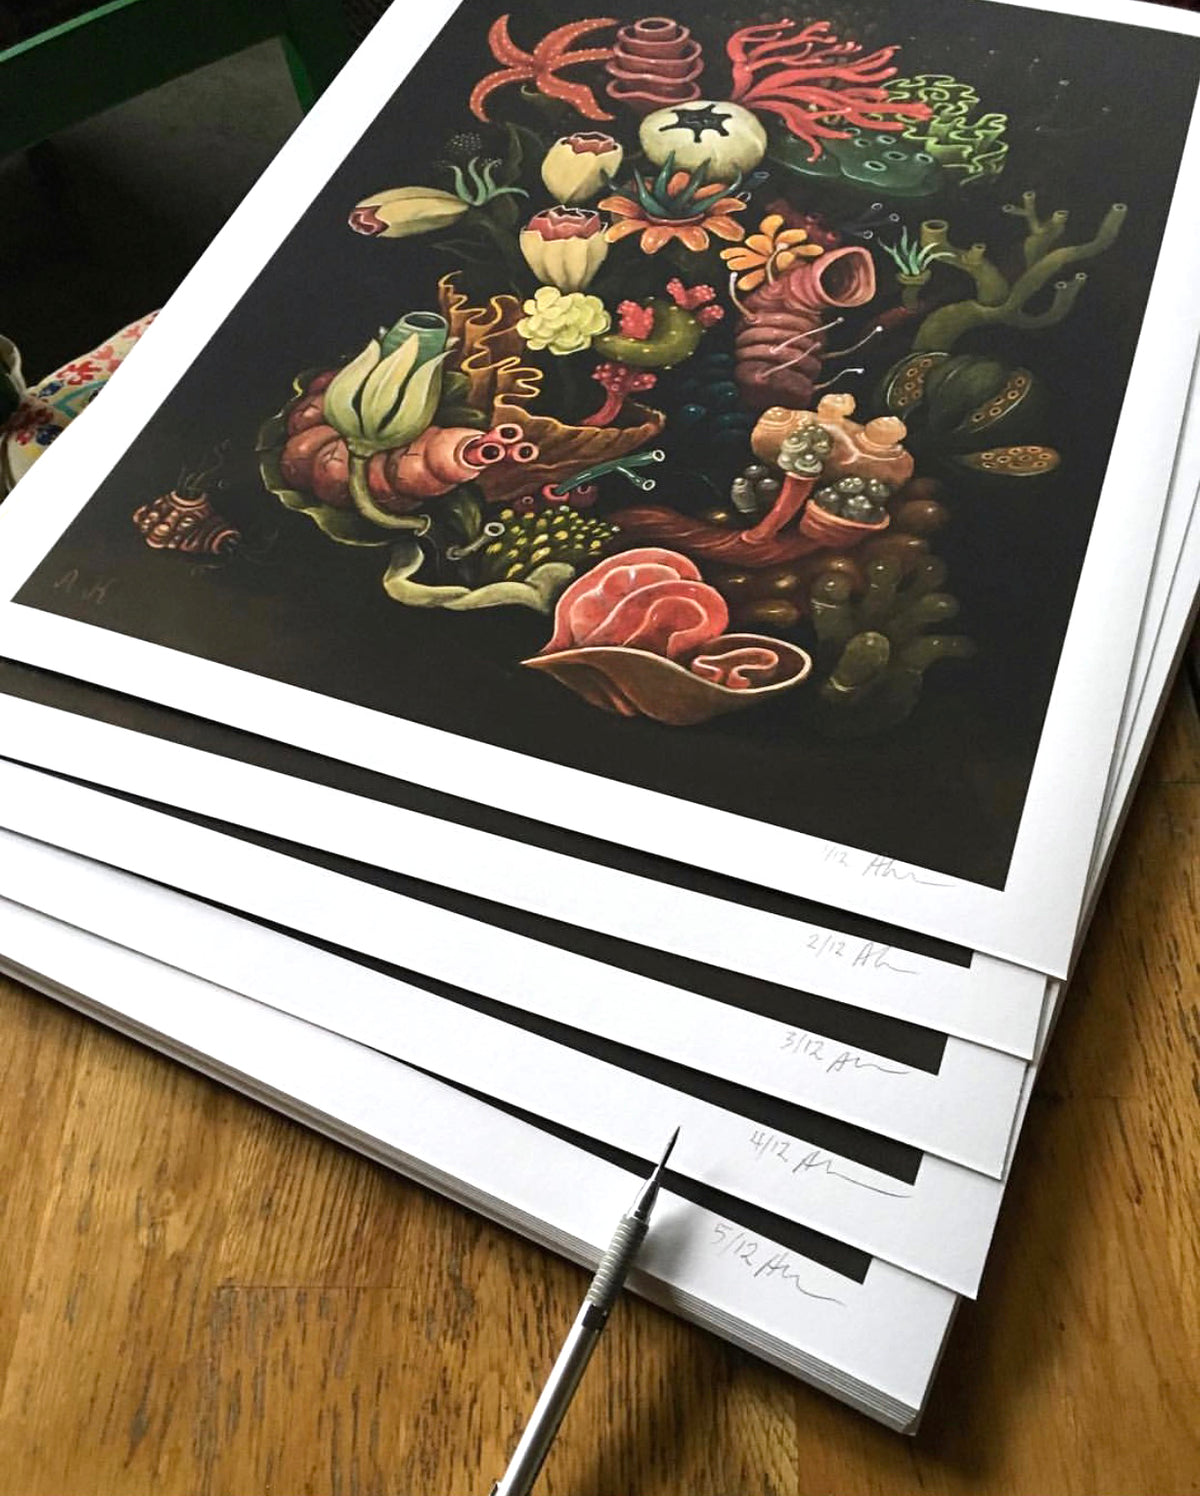 Alex Kuno &quot;Offal&quot; - Archival Print, Limited Edition of 12 - 18 x 24&quot;